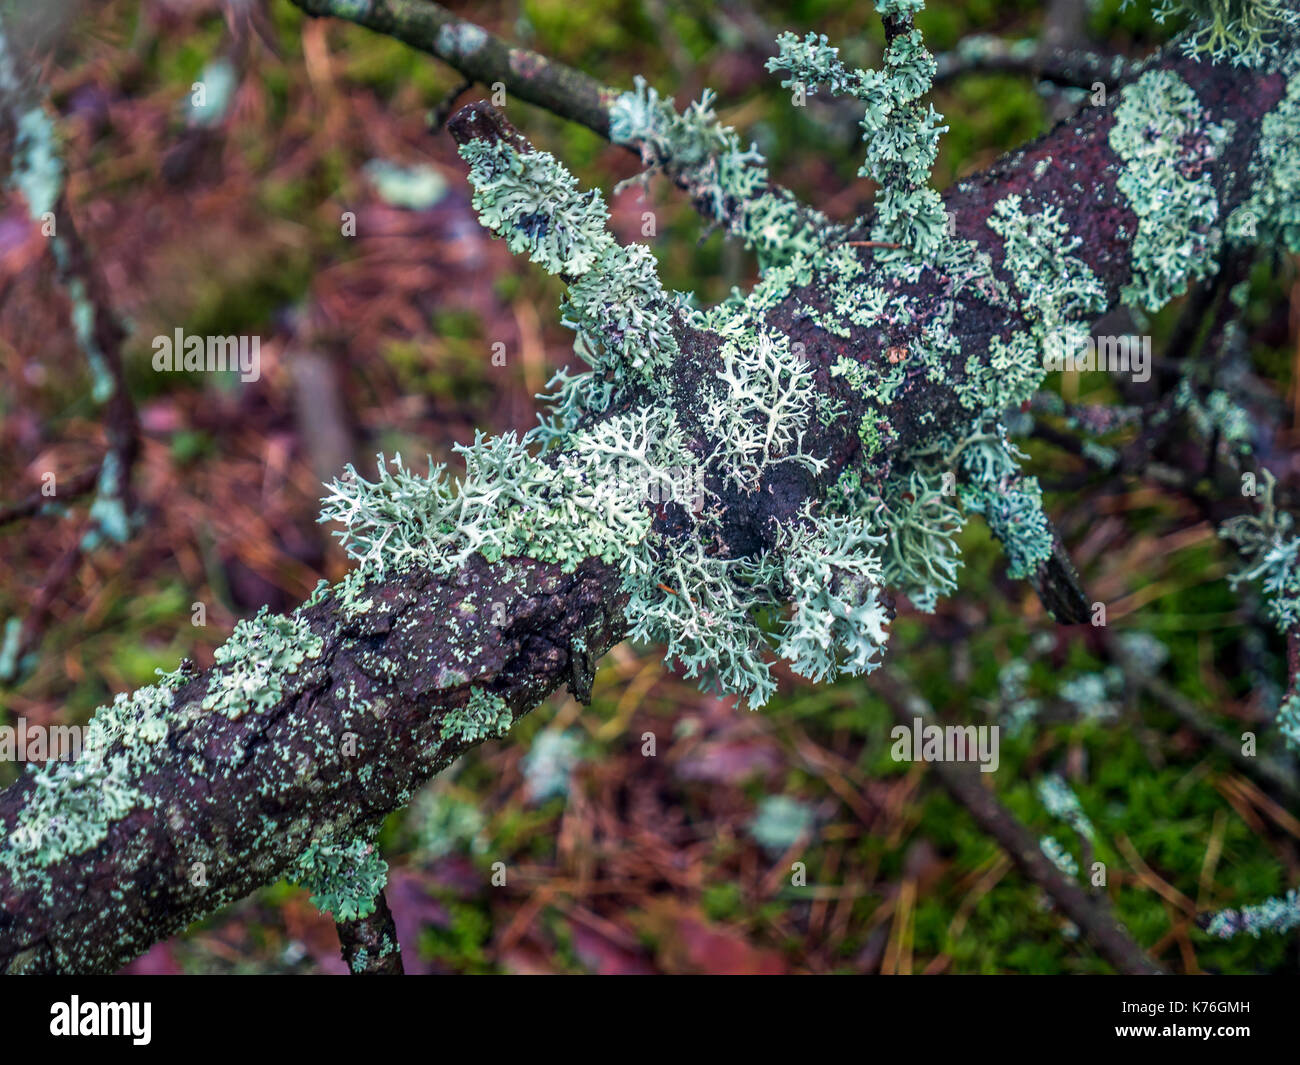 Lichen growing on old pine tree branch in the forest of the Slowinski National Park located on Polish coast close to the Baltic Sea, Poland Stock Photo